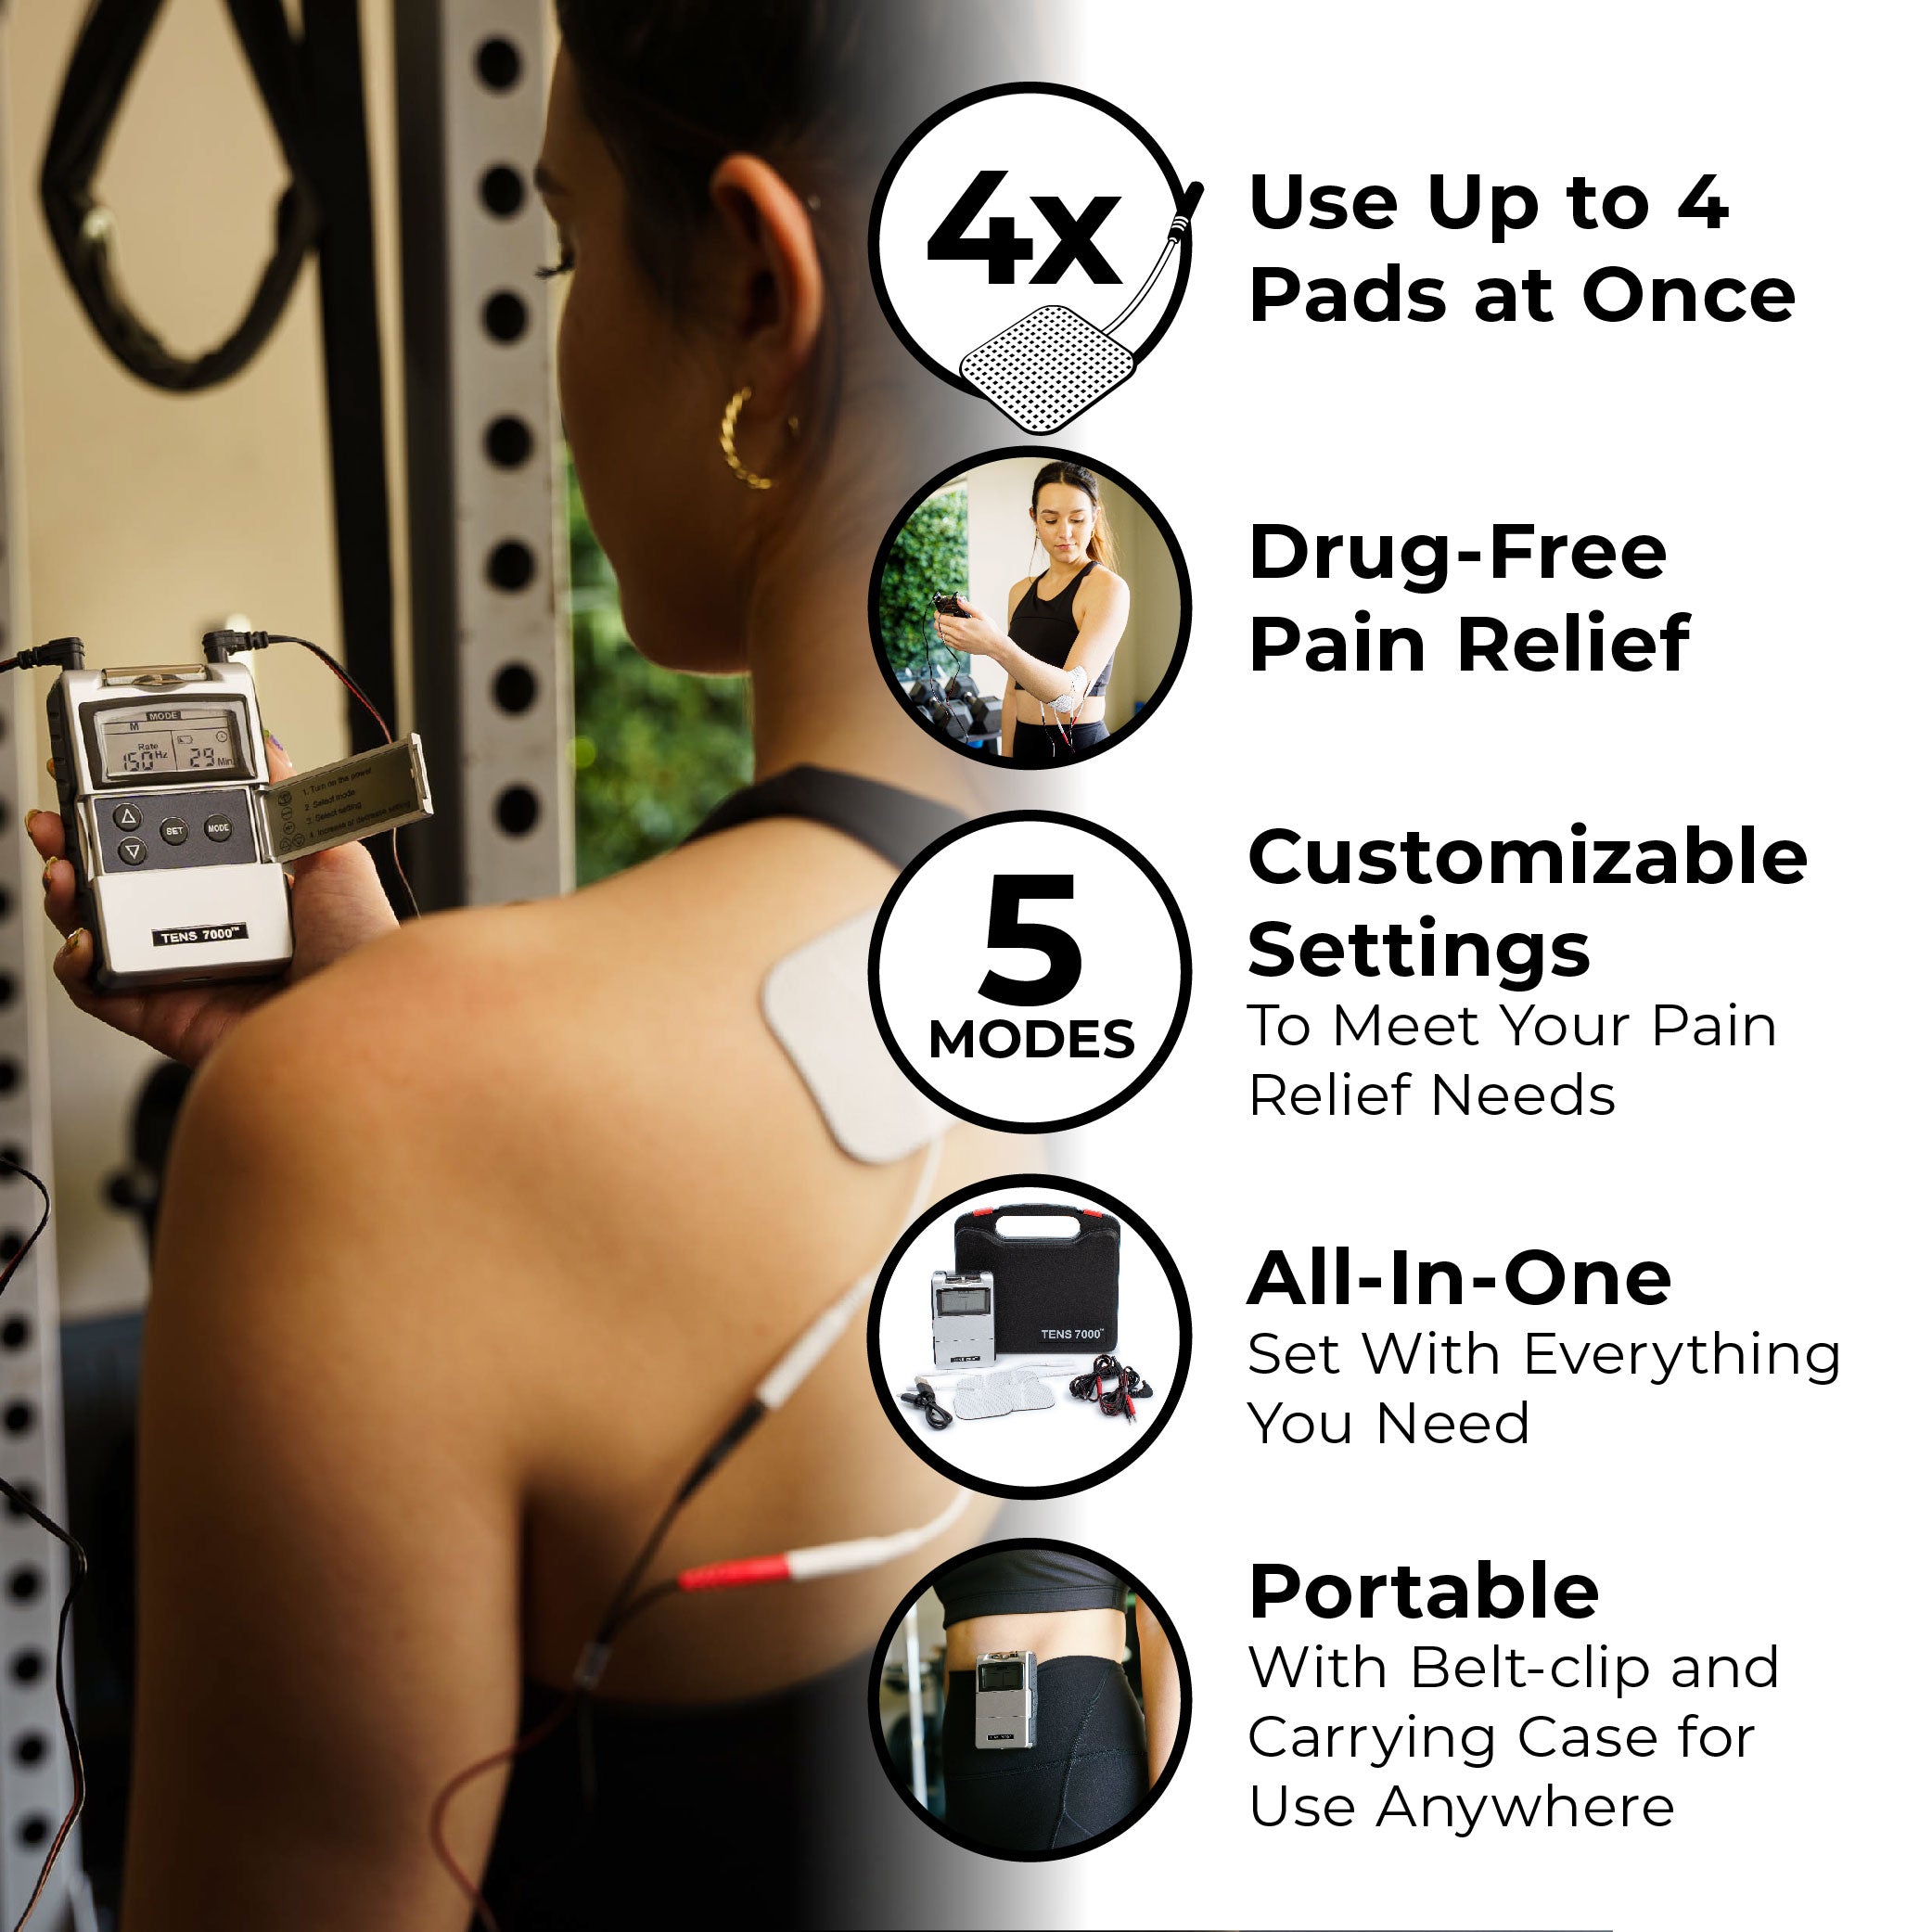 A woman holding a TENS unit with electrodes on her back